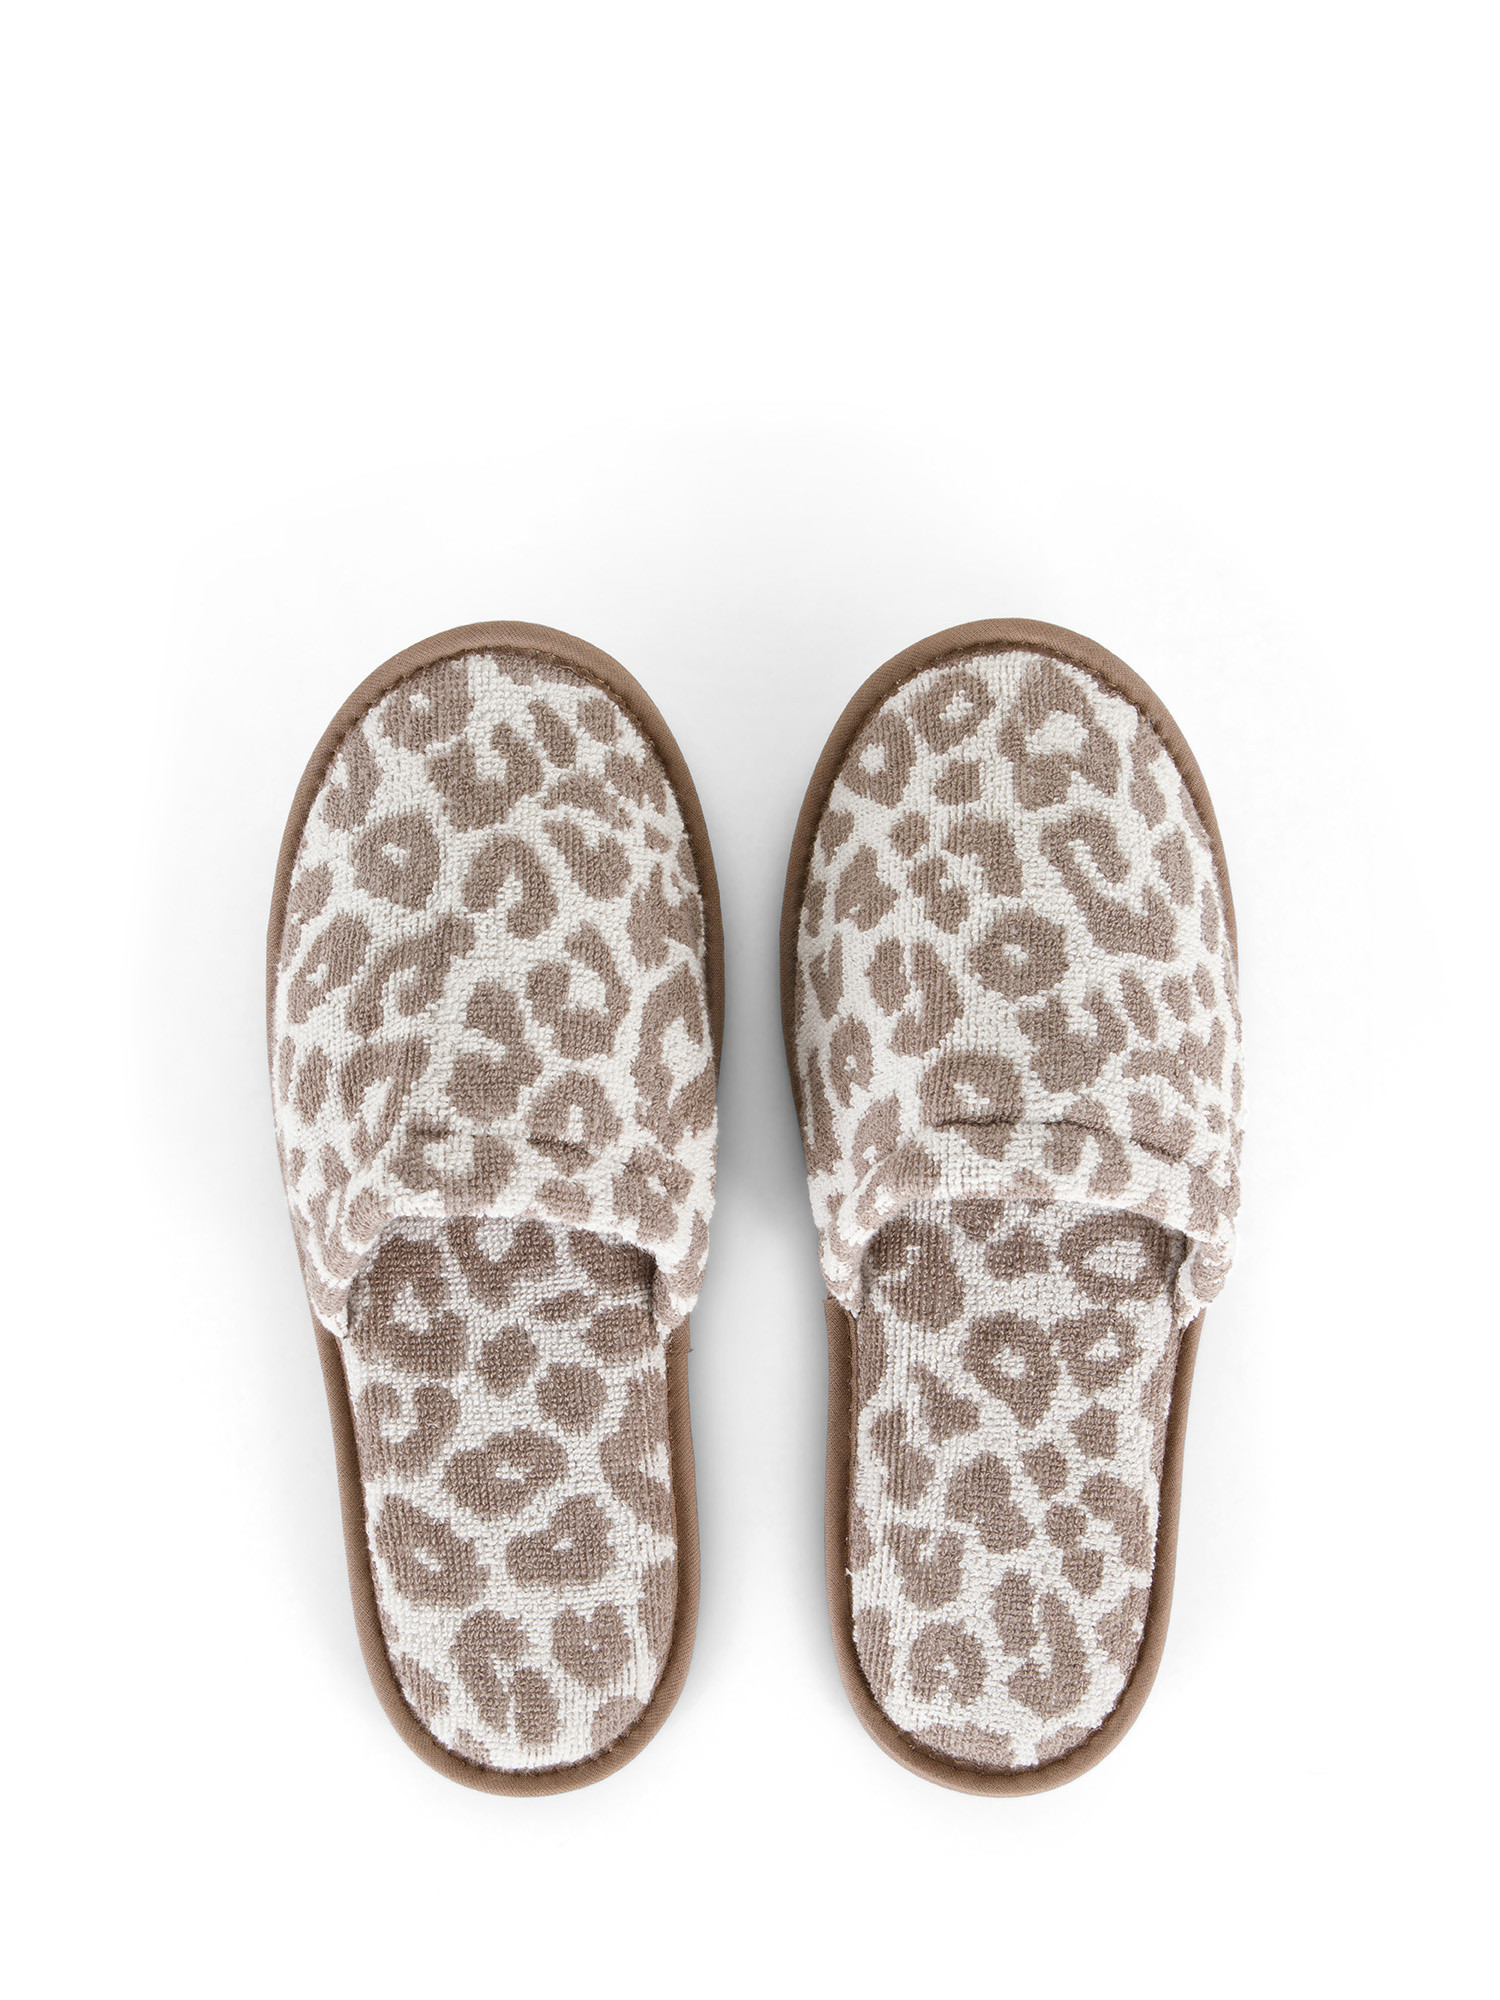 Animal print jacquard cotton terry slippers, Beige, large image number 0